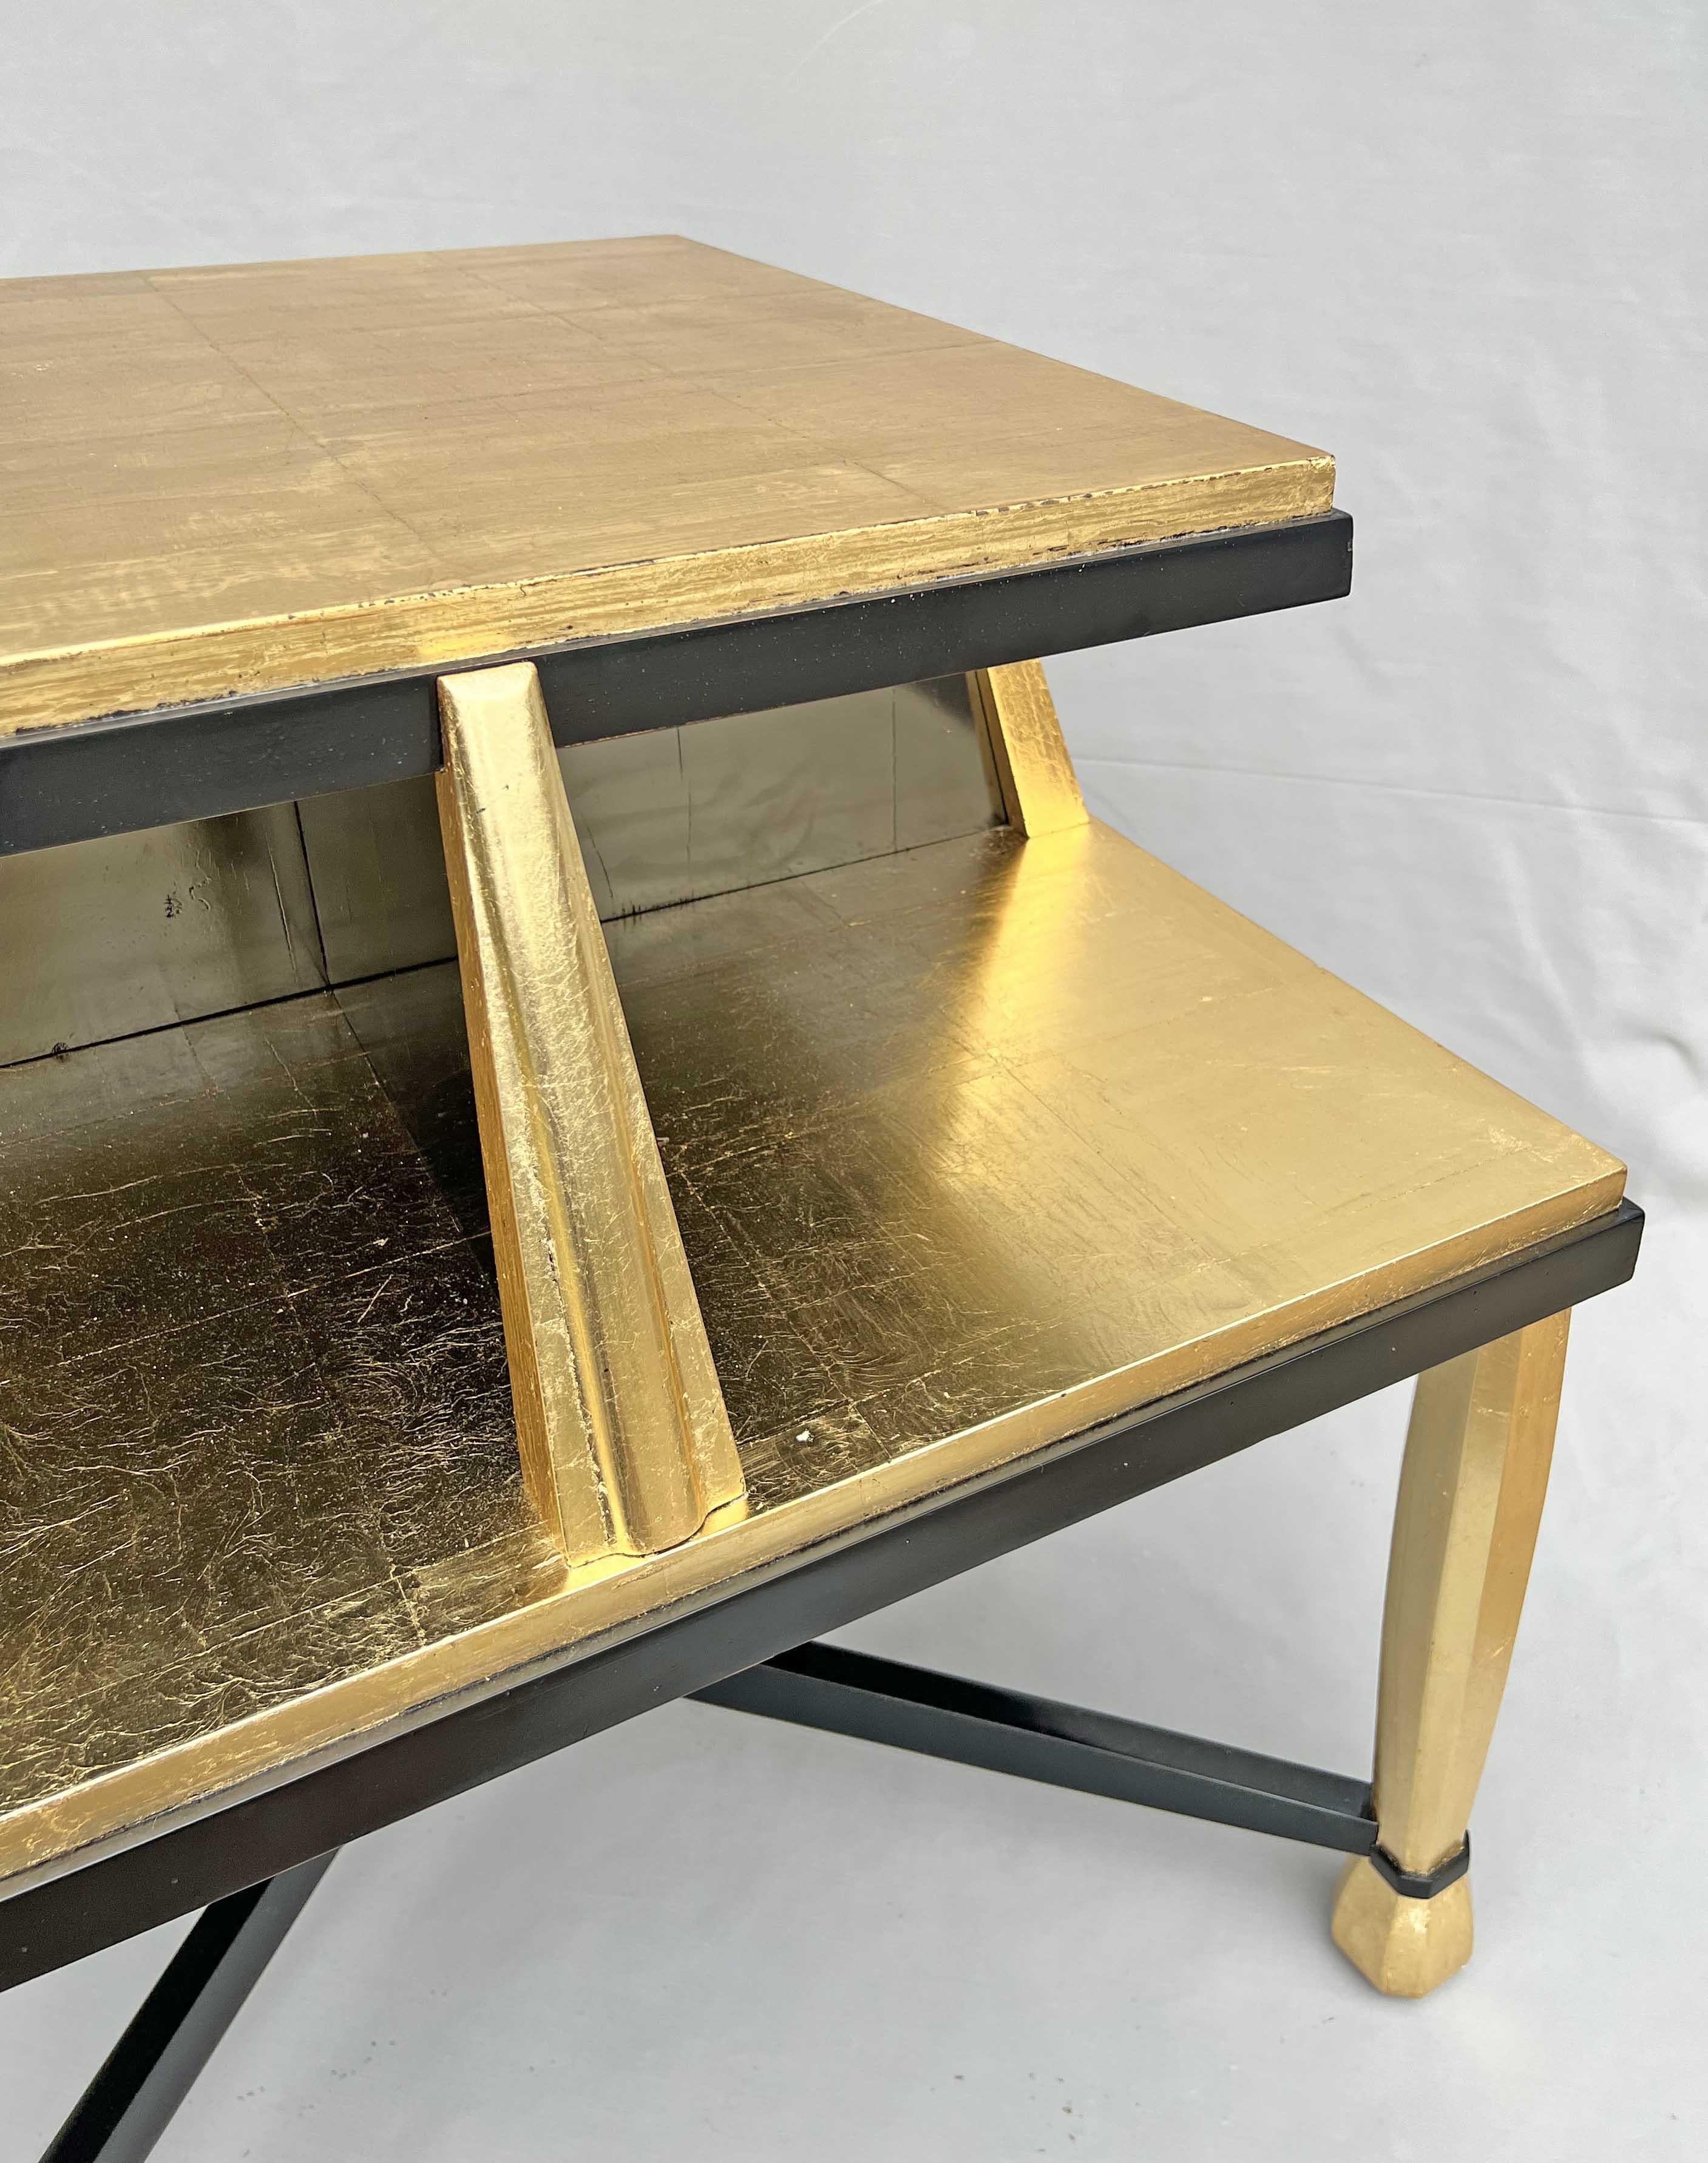 Art Deco Coffee Table in Giltwood and Black Lacquer, 1930s For Sale 8